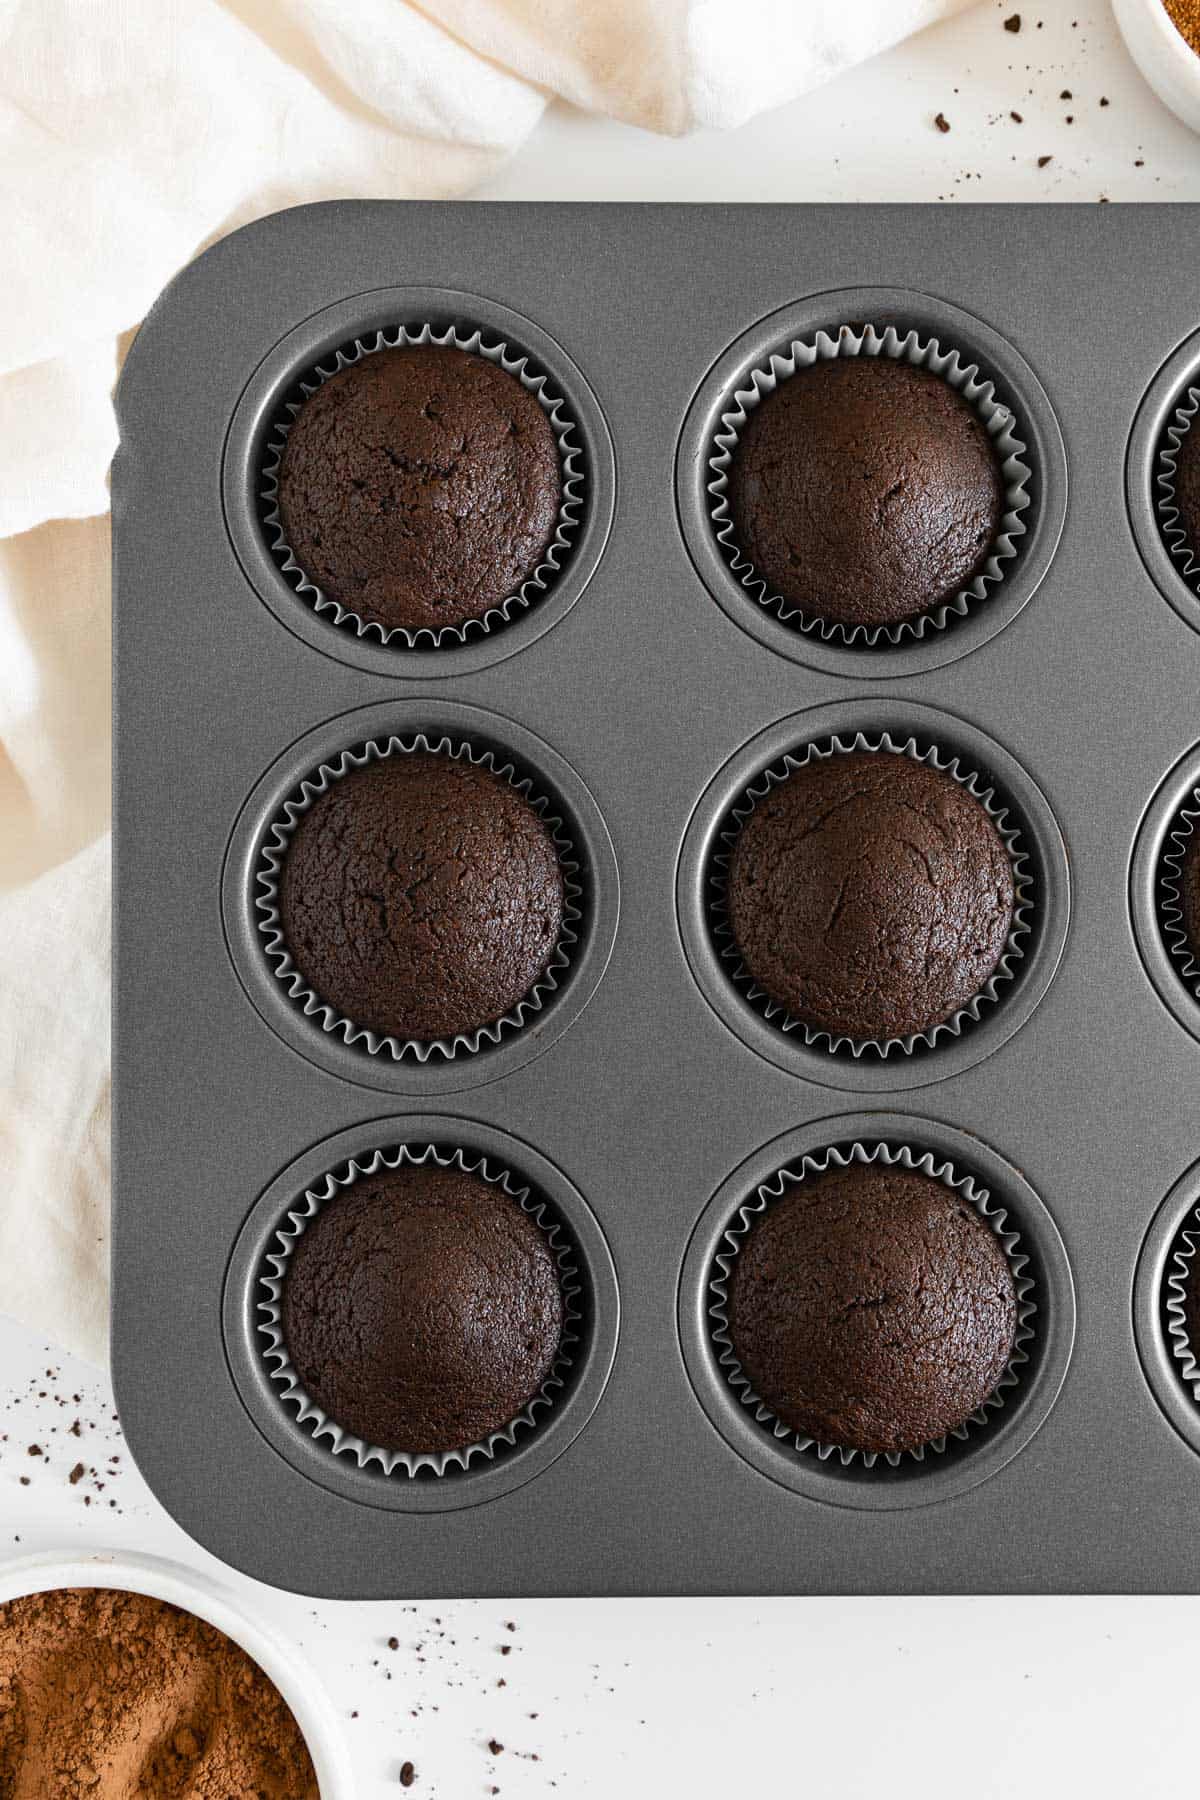 vegan chocolate cupcakes freshly baked inside a muffin tin